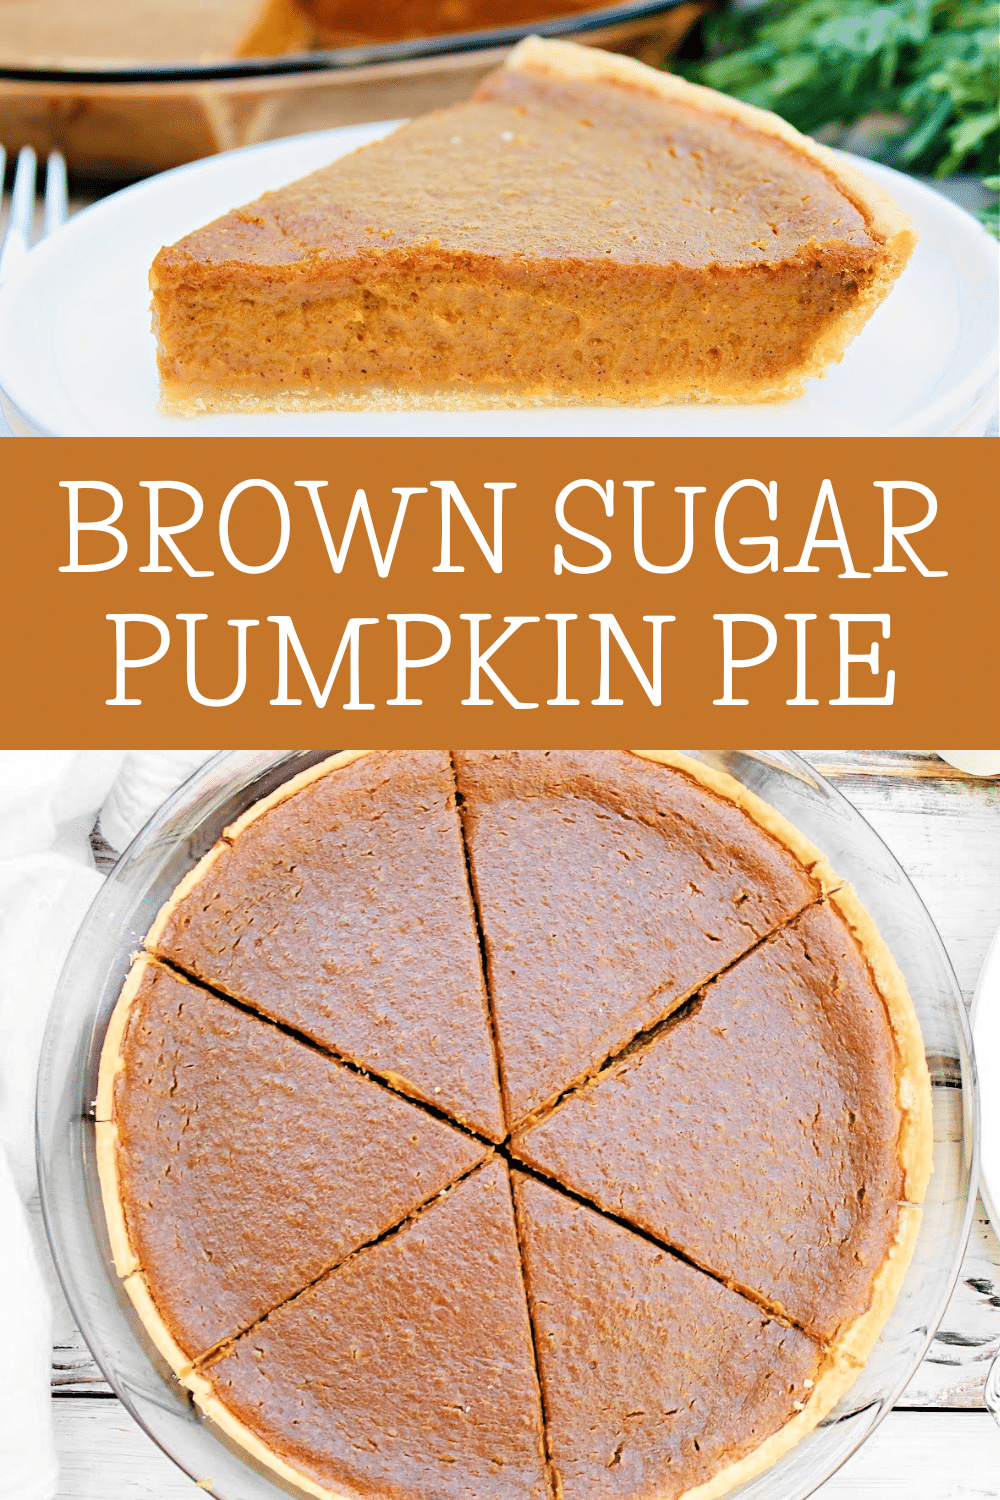 Brown Sugar Pumpkin Pie ~ Dark brown sugar adds a rich, molasses-like sweetness to classic pumpkin pie. Perfect for the holiday table! via @thiswifecooks